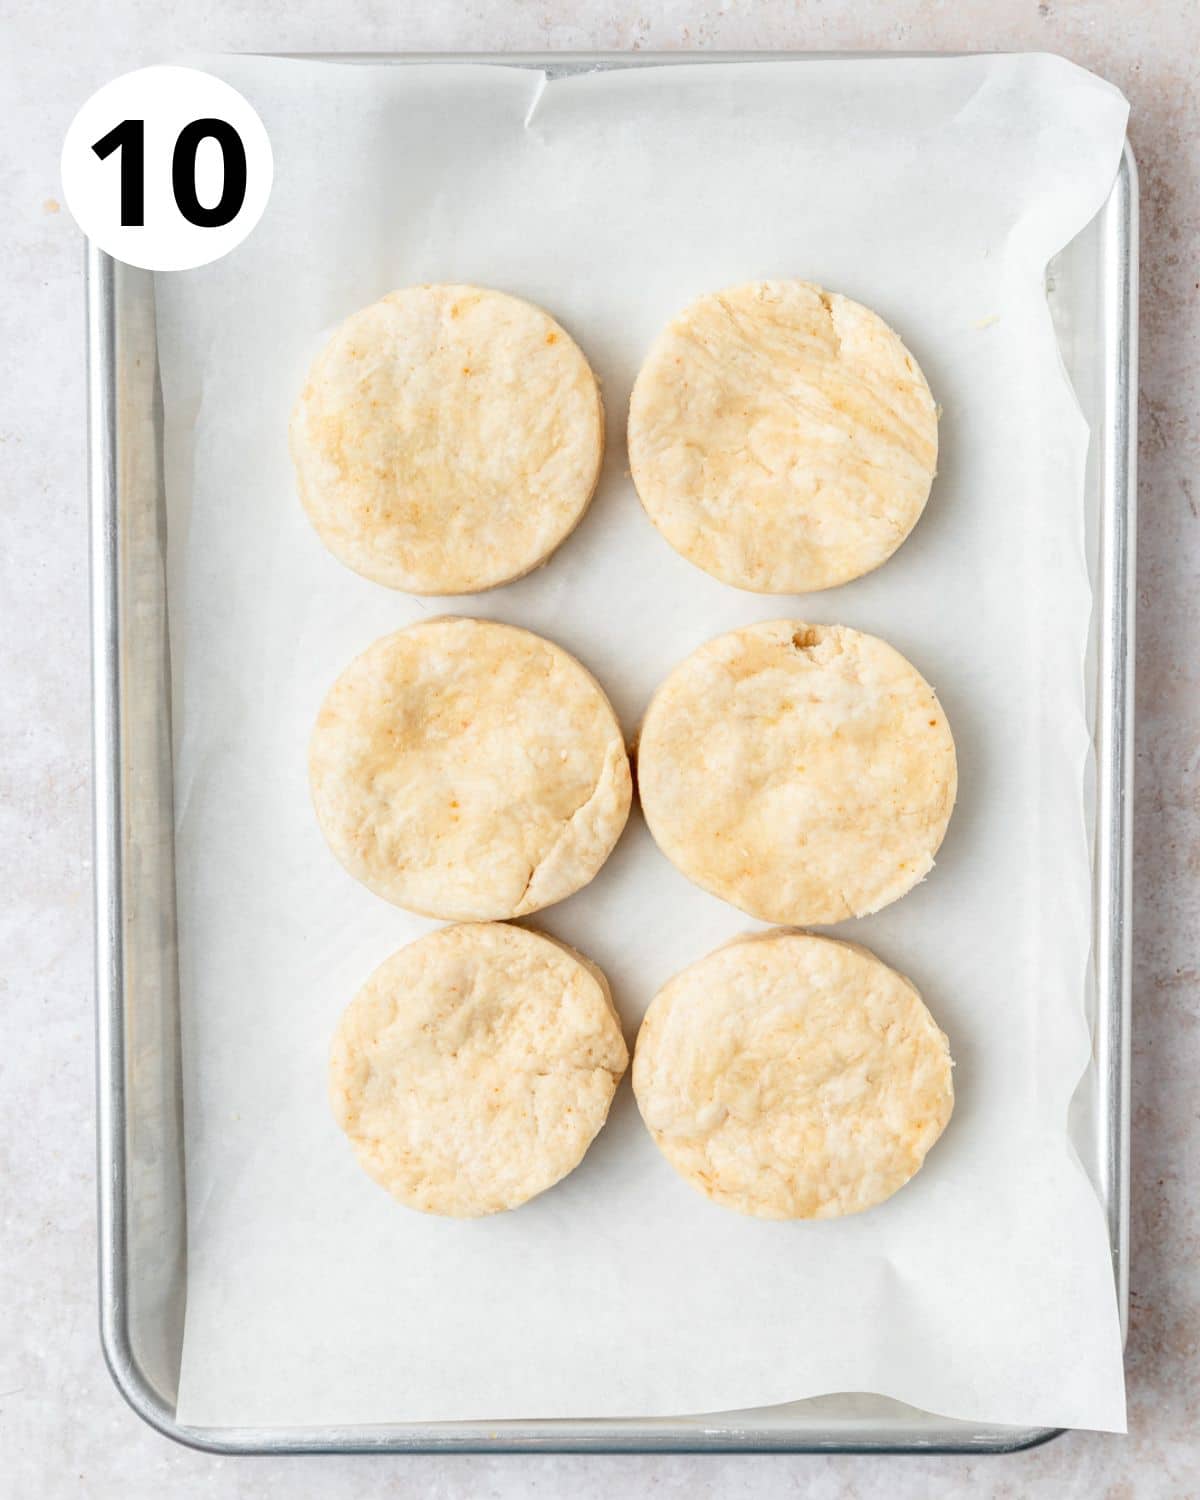 6 biscuits on baking sheet before baking.